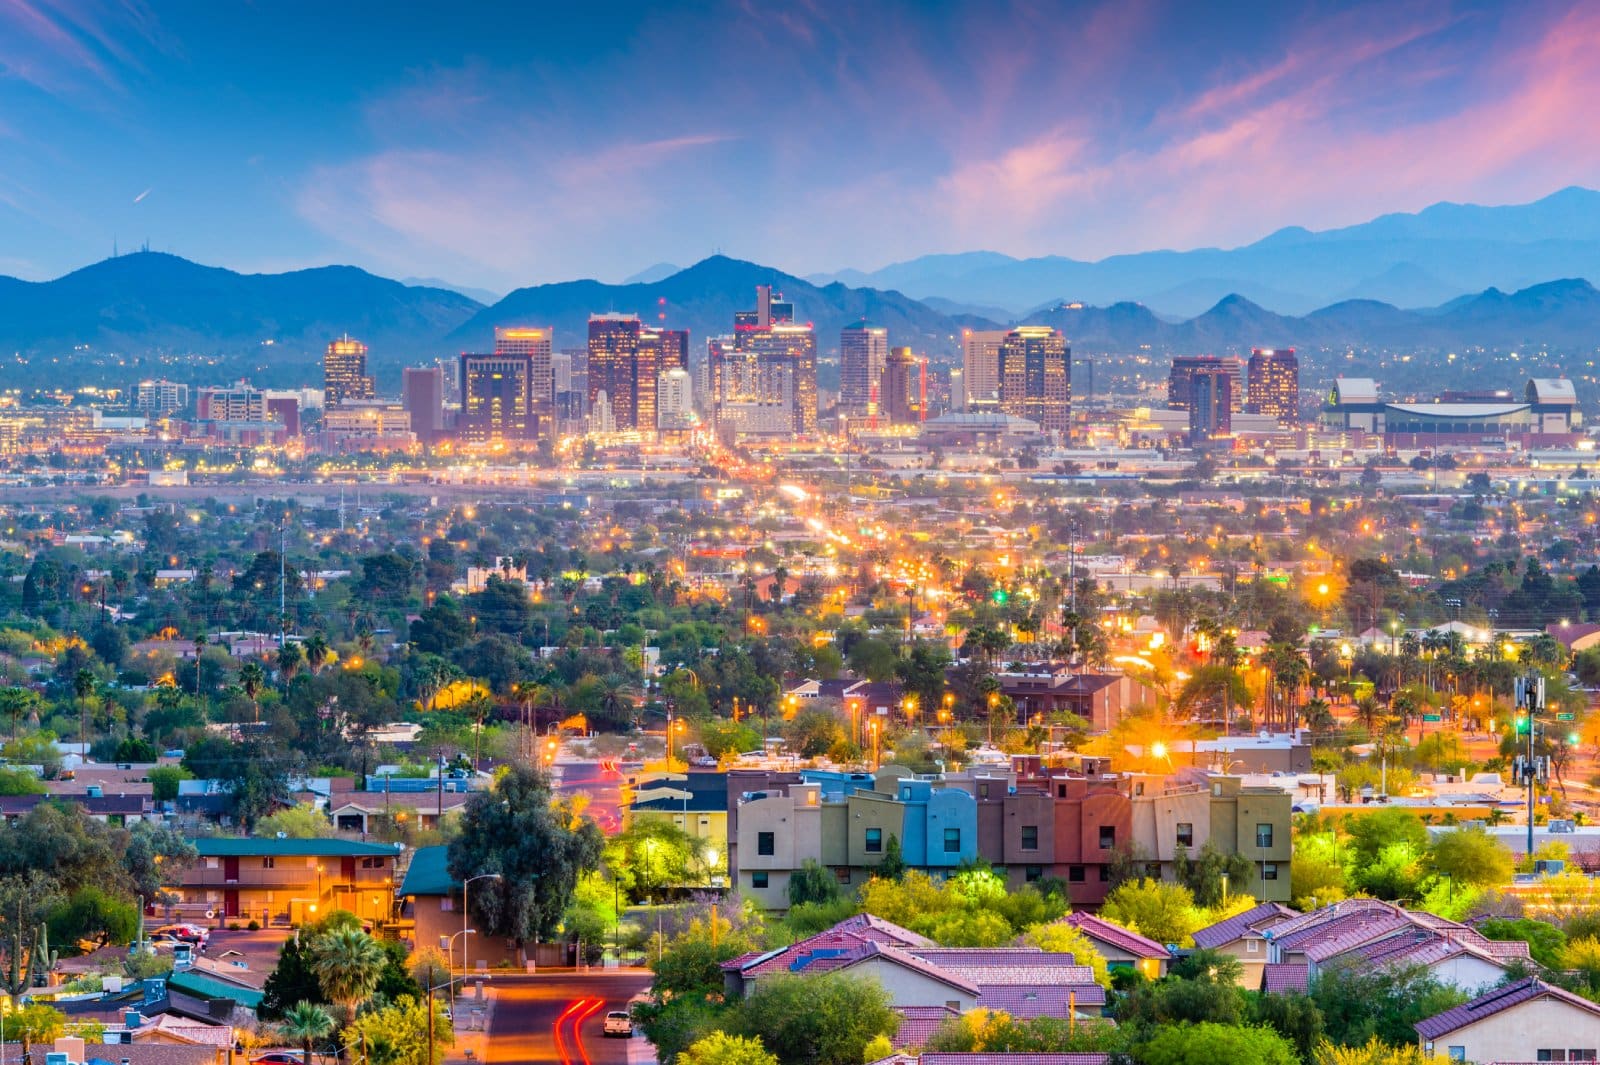 <p class="wp-caption-text">Image Credit: Shutterstock / Sean Pavone</p>  <p><span>Phoenix offers sunny days and plenty of golf. Luxury accommodations can reach $2,500 a month, but RV parks offer a sunny stay for around $500. Quirkiness abounds with cowboy-themed accommodations. Giddy up for a wild west adventure!</span></p>